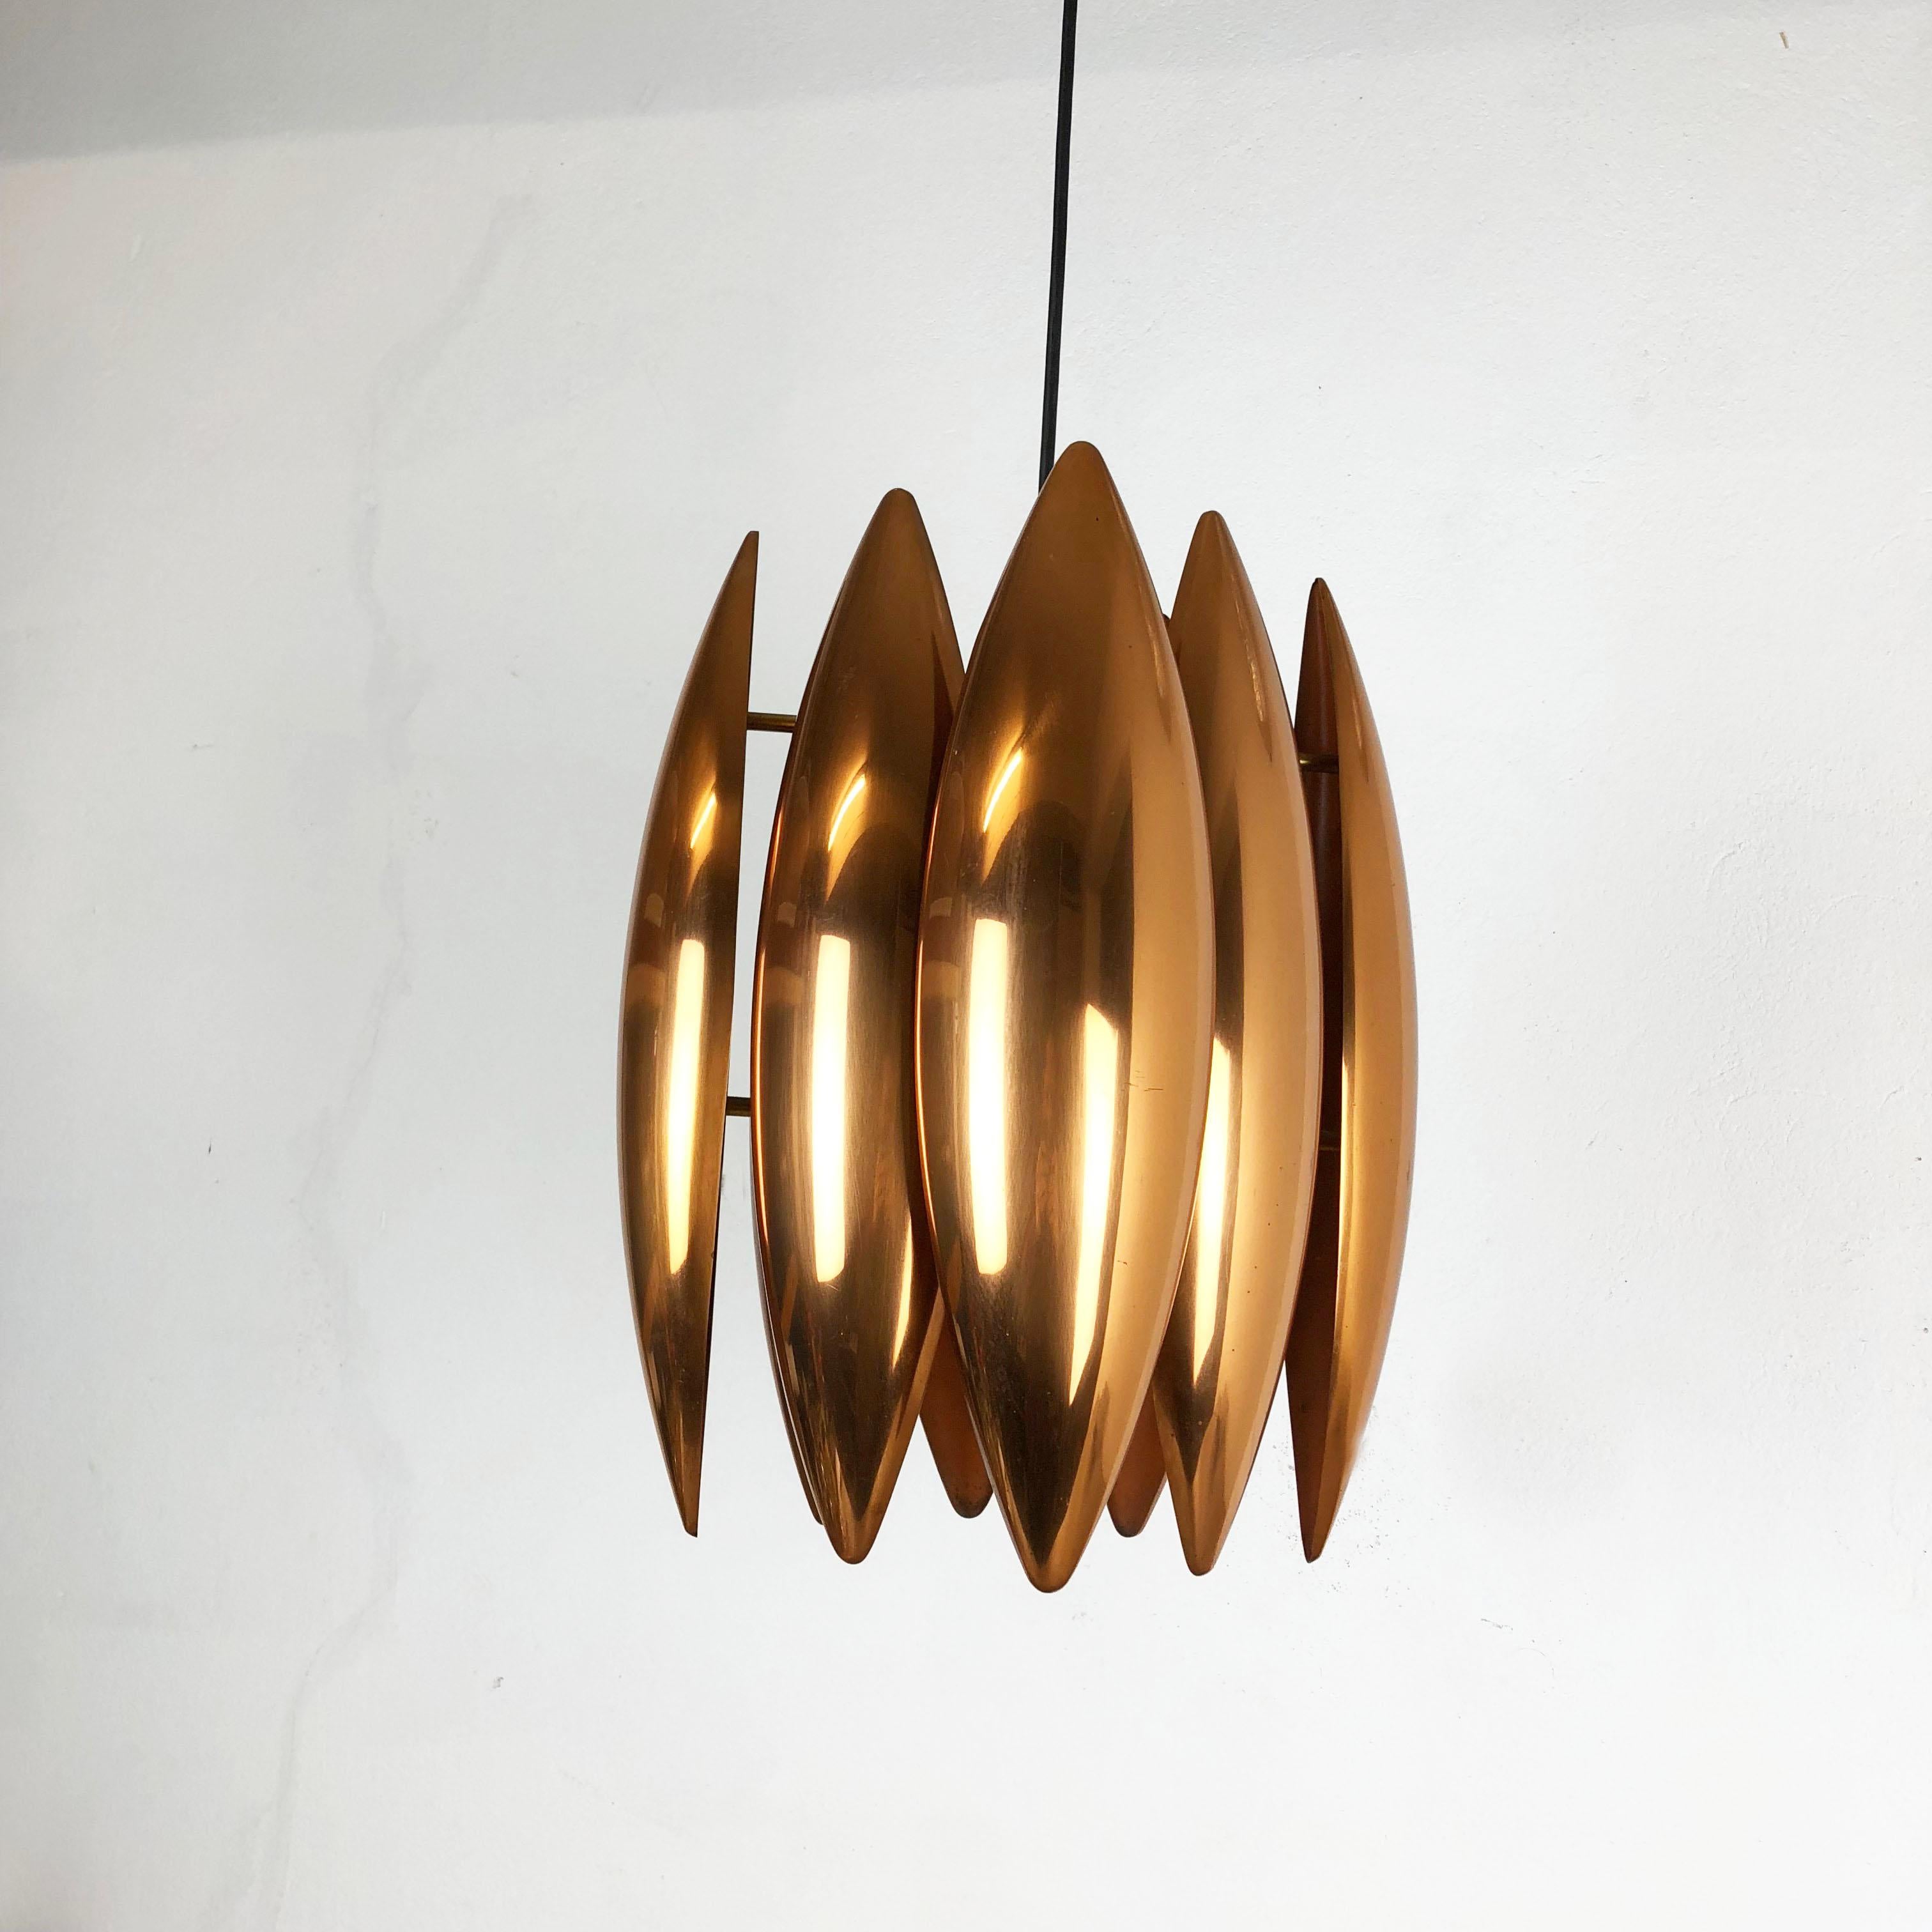 Article:

hanging light


Modell:

Kastor


Design:

Jo Hammborg 


Producer:

Fog and Mørup



Origin:

Denmark



Age:

1960s





This metal hanging light is a high quality production element from the 1960s. The